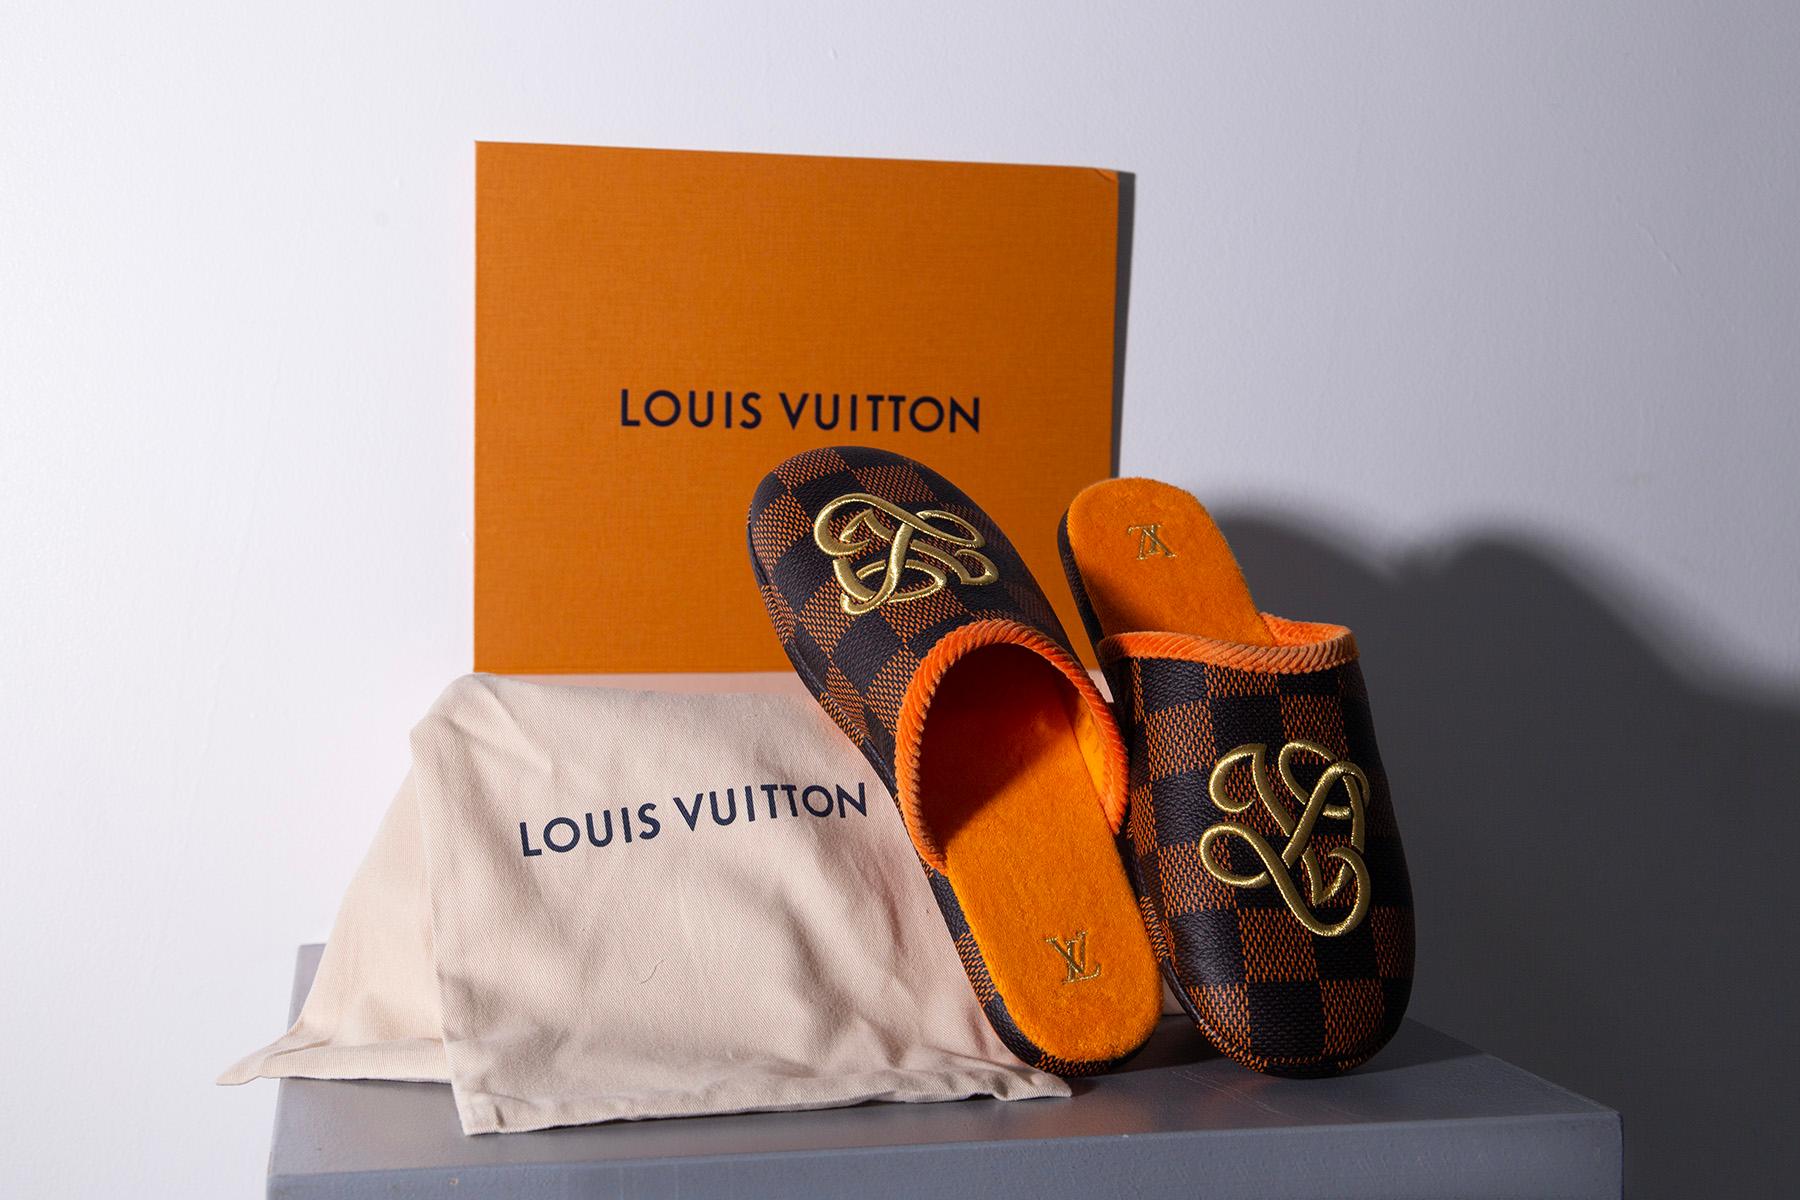 The LV Palace slipper collection, designed in collaboration with famed singer Pharrell Williams, is the epitome of luxury and style. Made of Damier grained calfskin, these slippers emulate the iconic Damier canvas pattern, exuding sophistication and